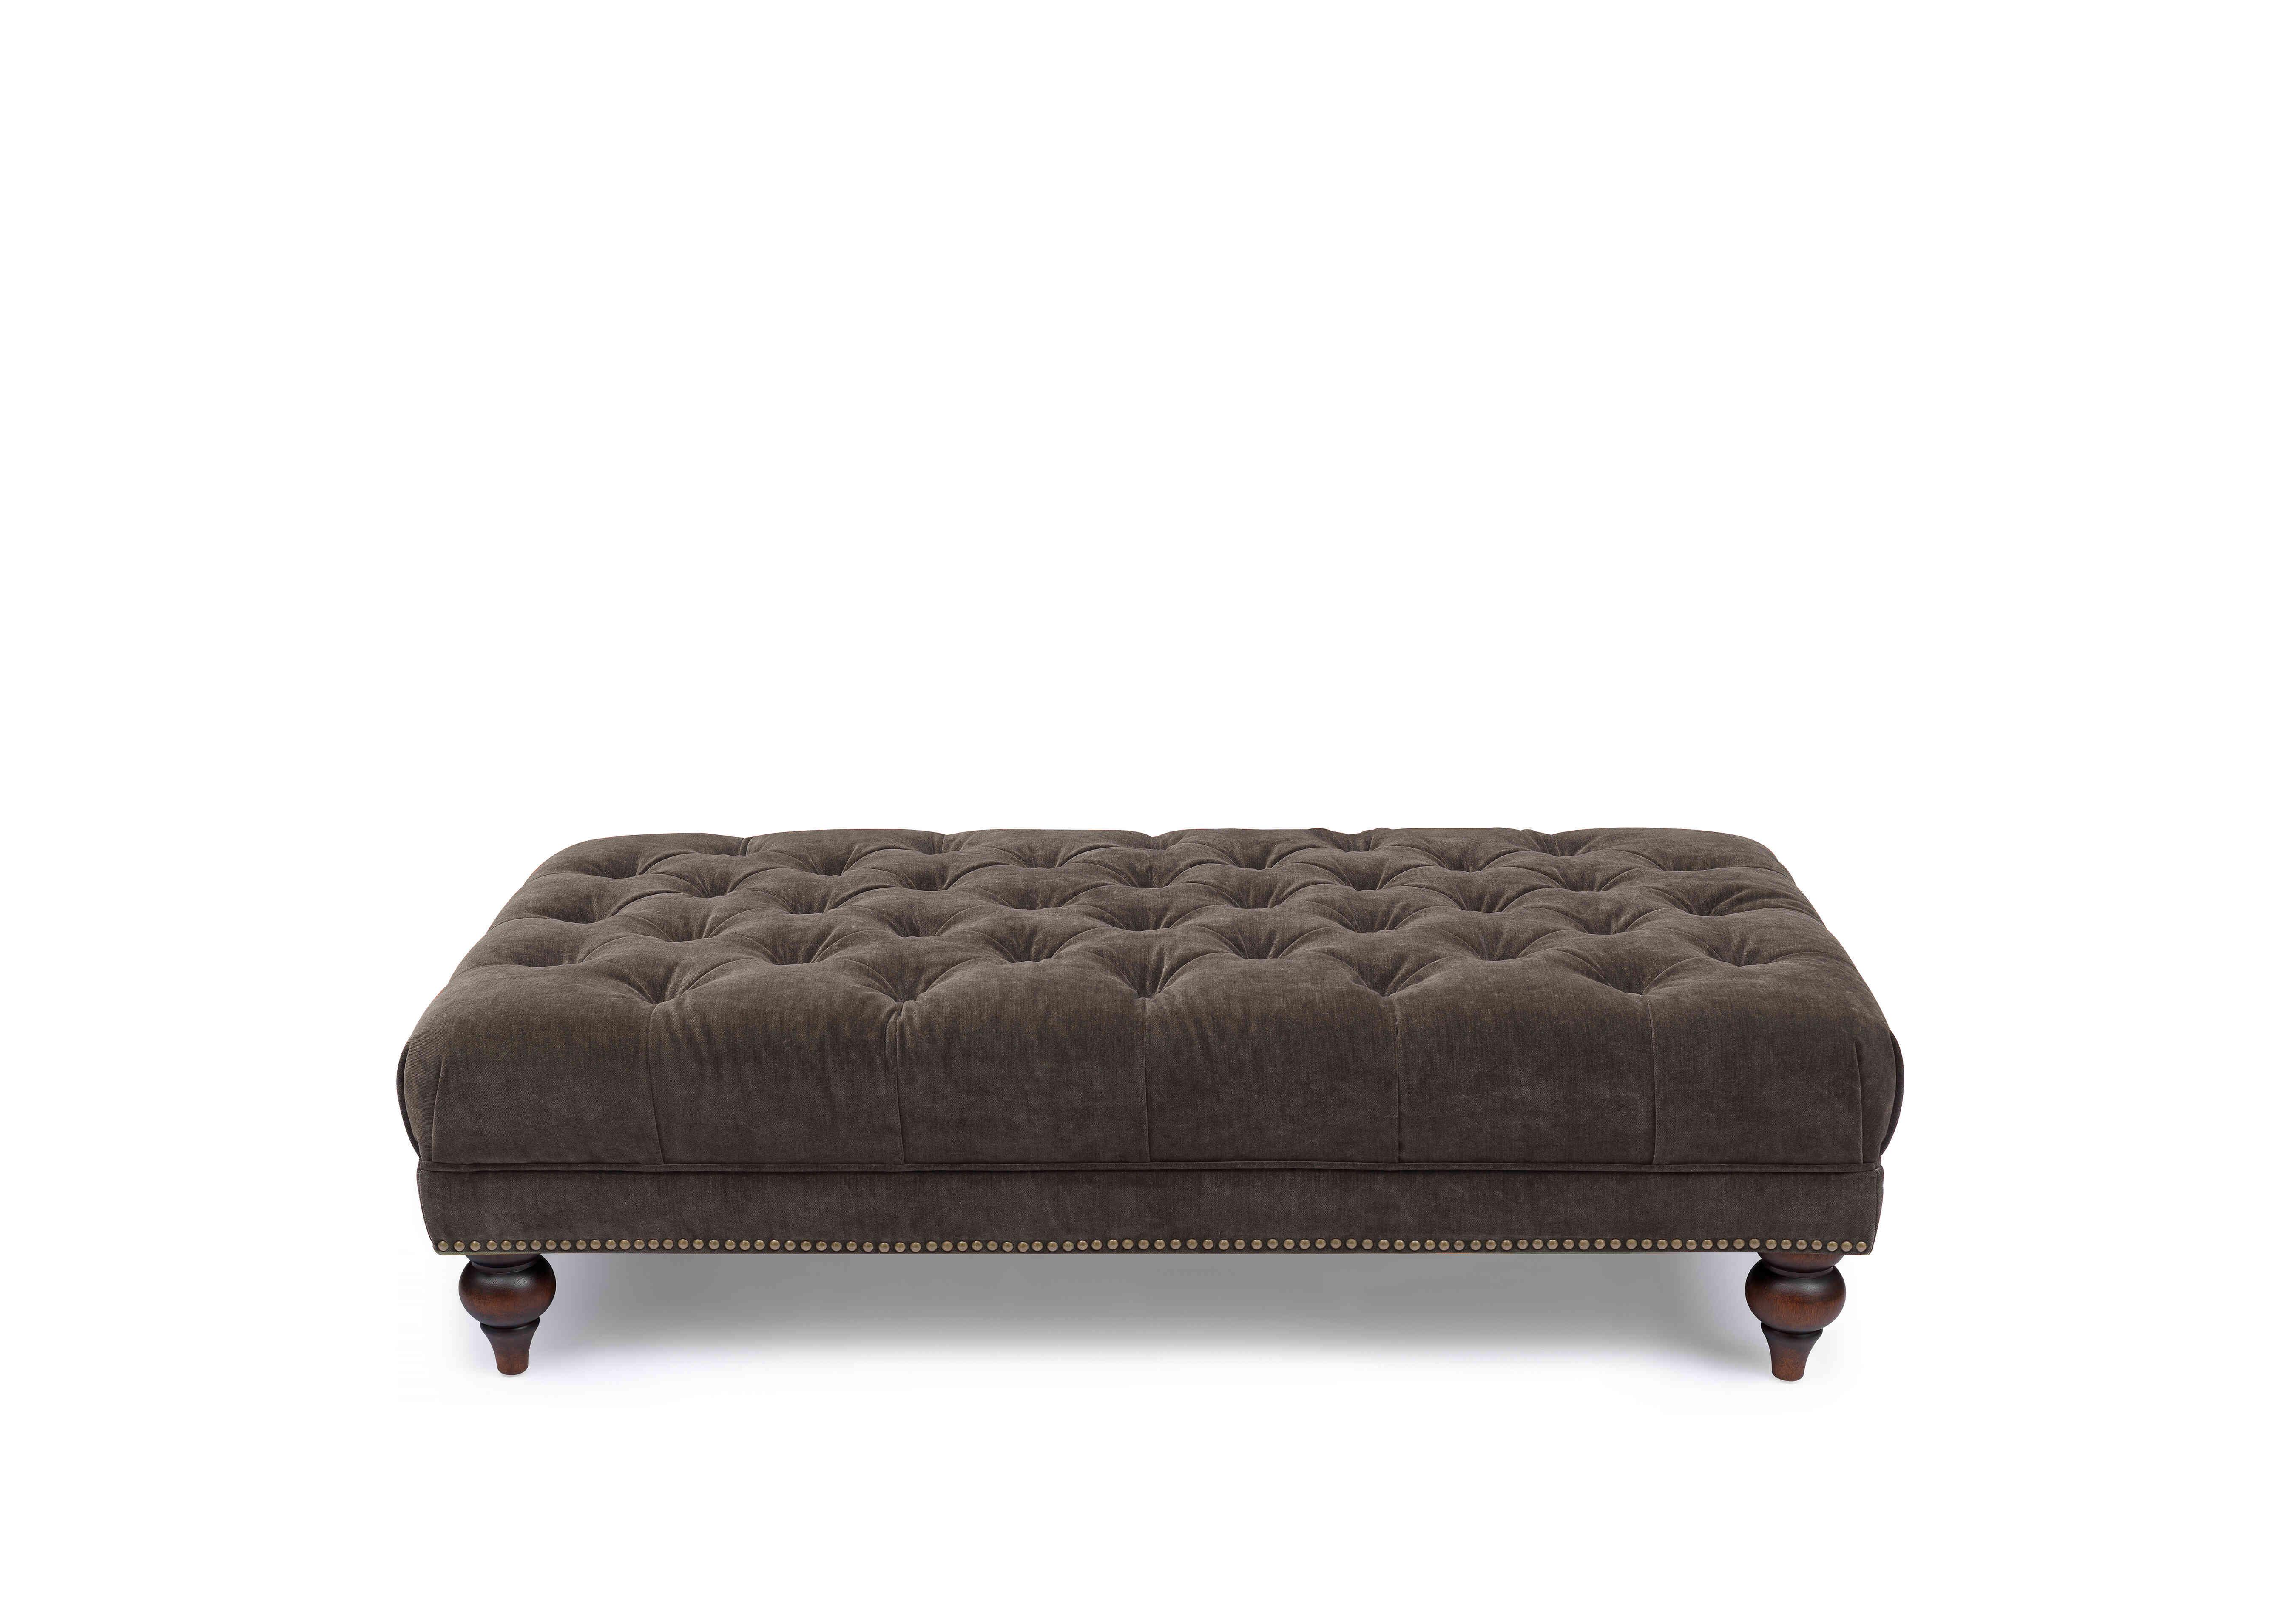 Wallace Fabric Rectangular Footstool with Turned Feet in X3y1-W020 Brindle on Furniture Village